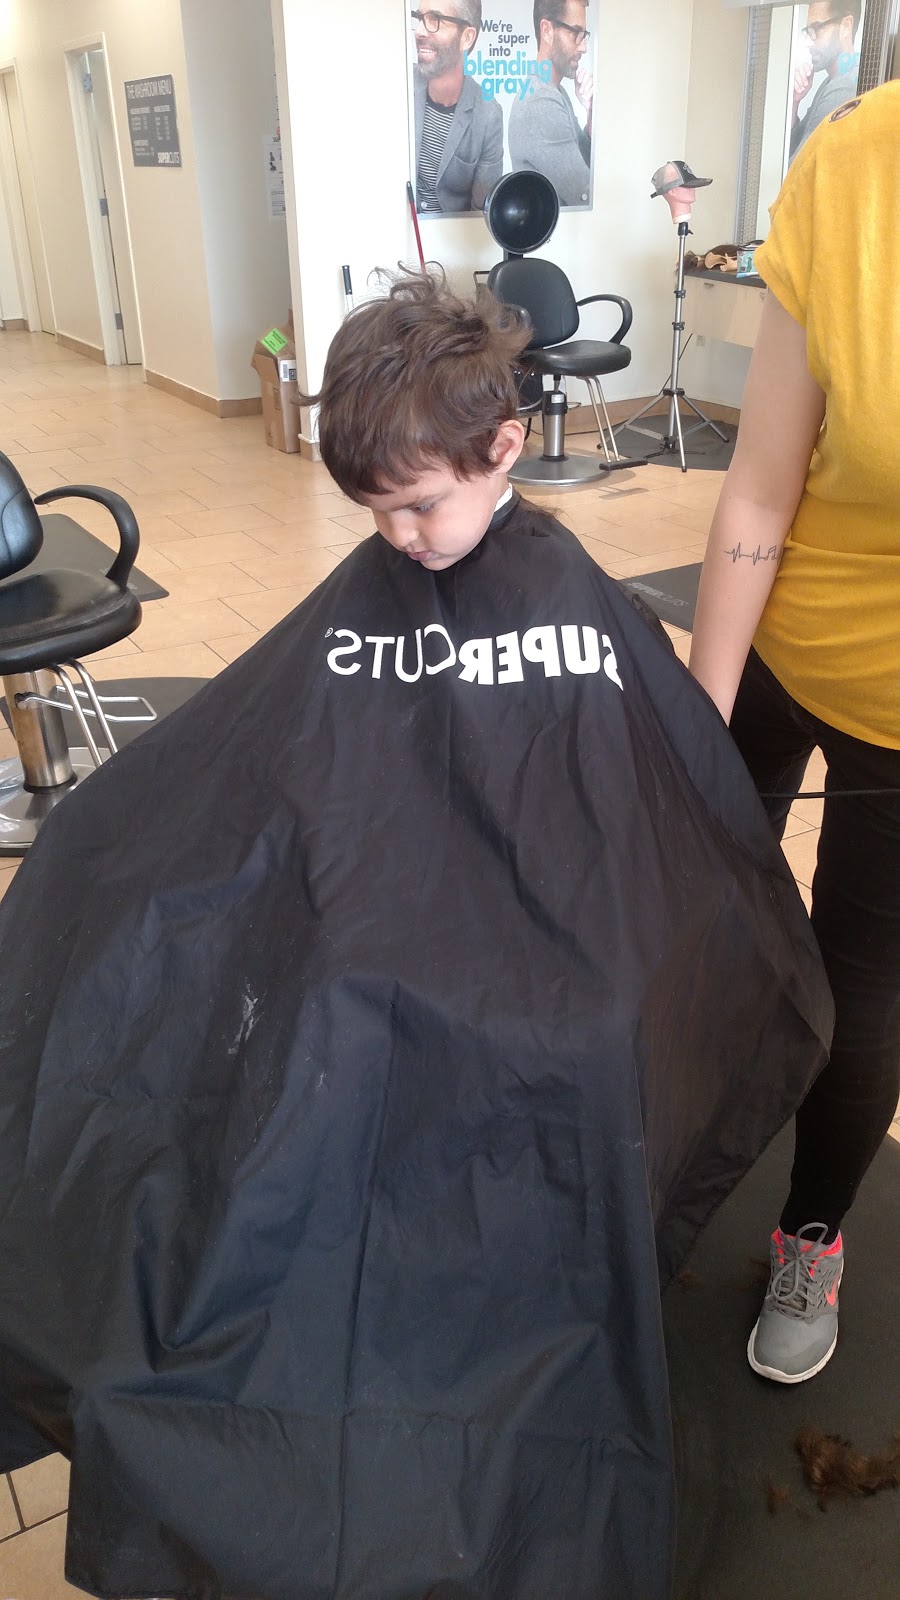 Supercuts | 1921 S Green Ave, Purcell, OK 73080, USA | Phone: (405) 527-1236